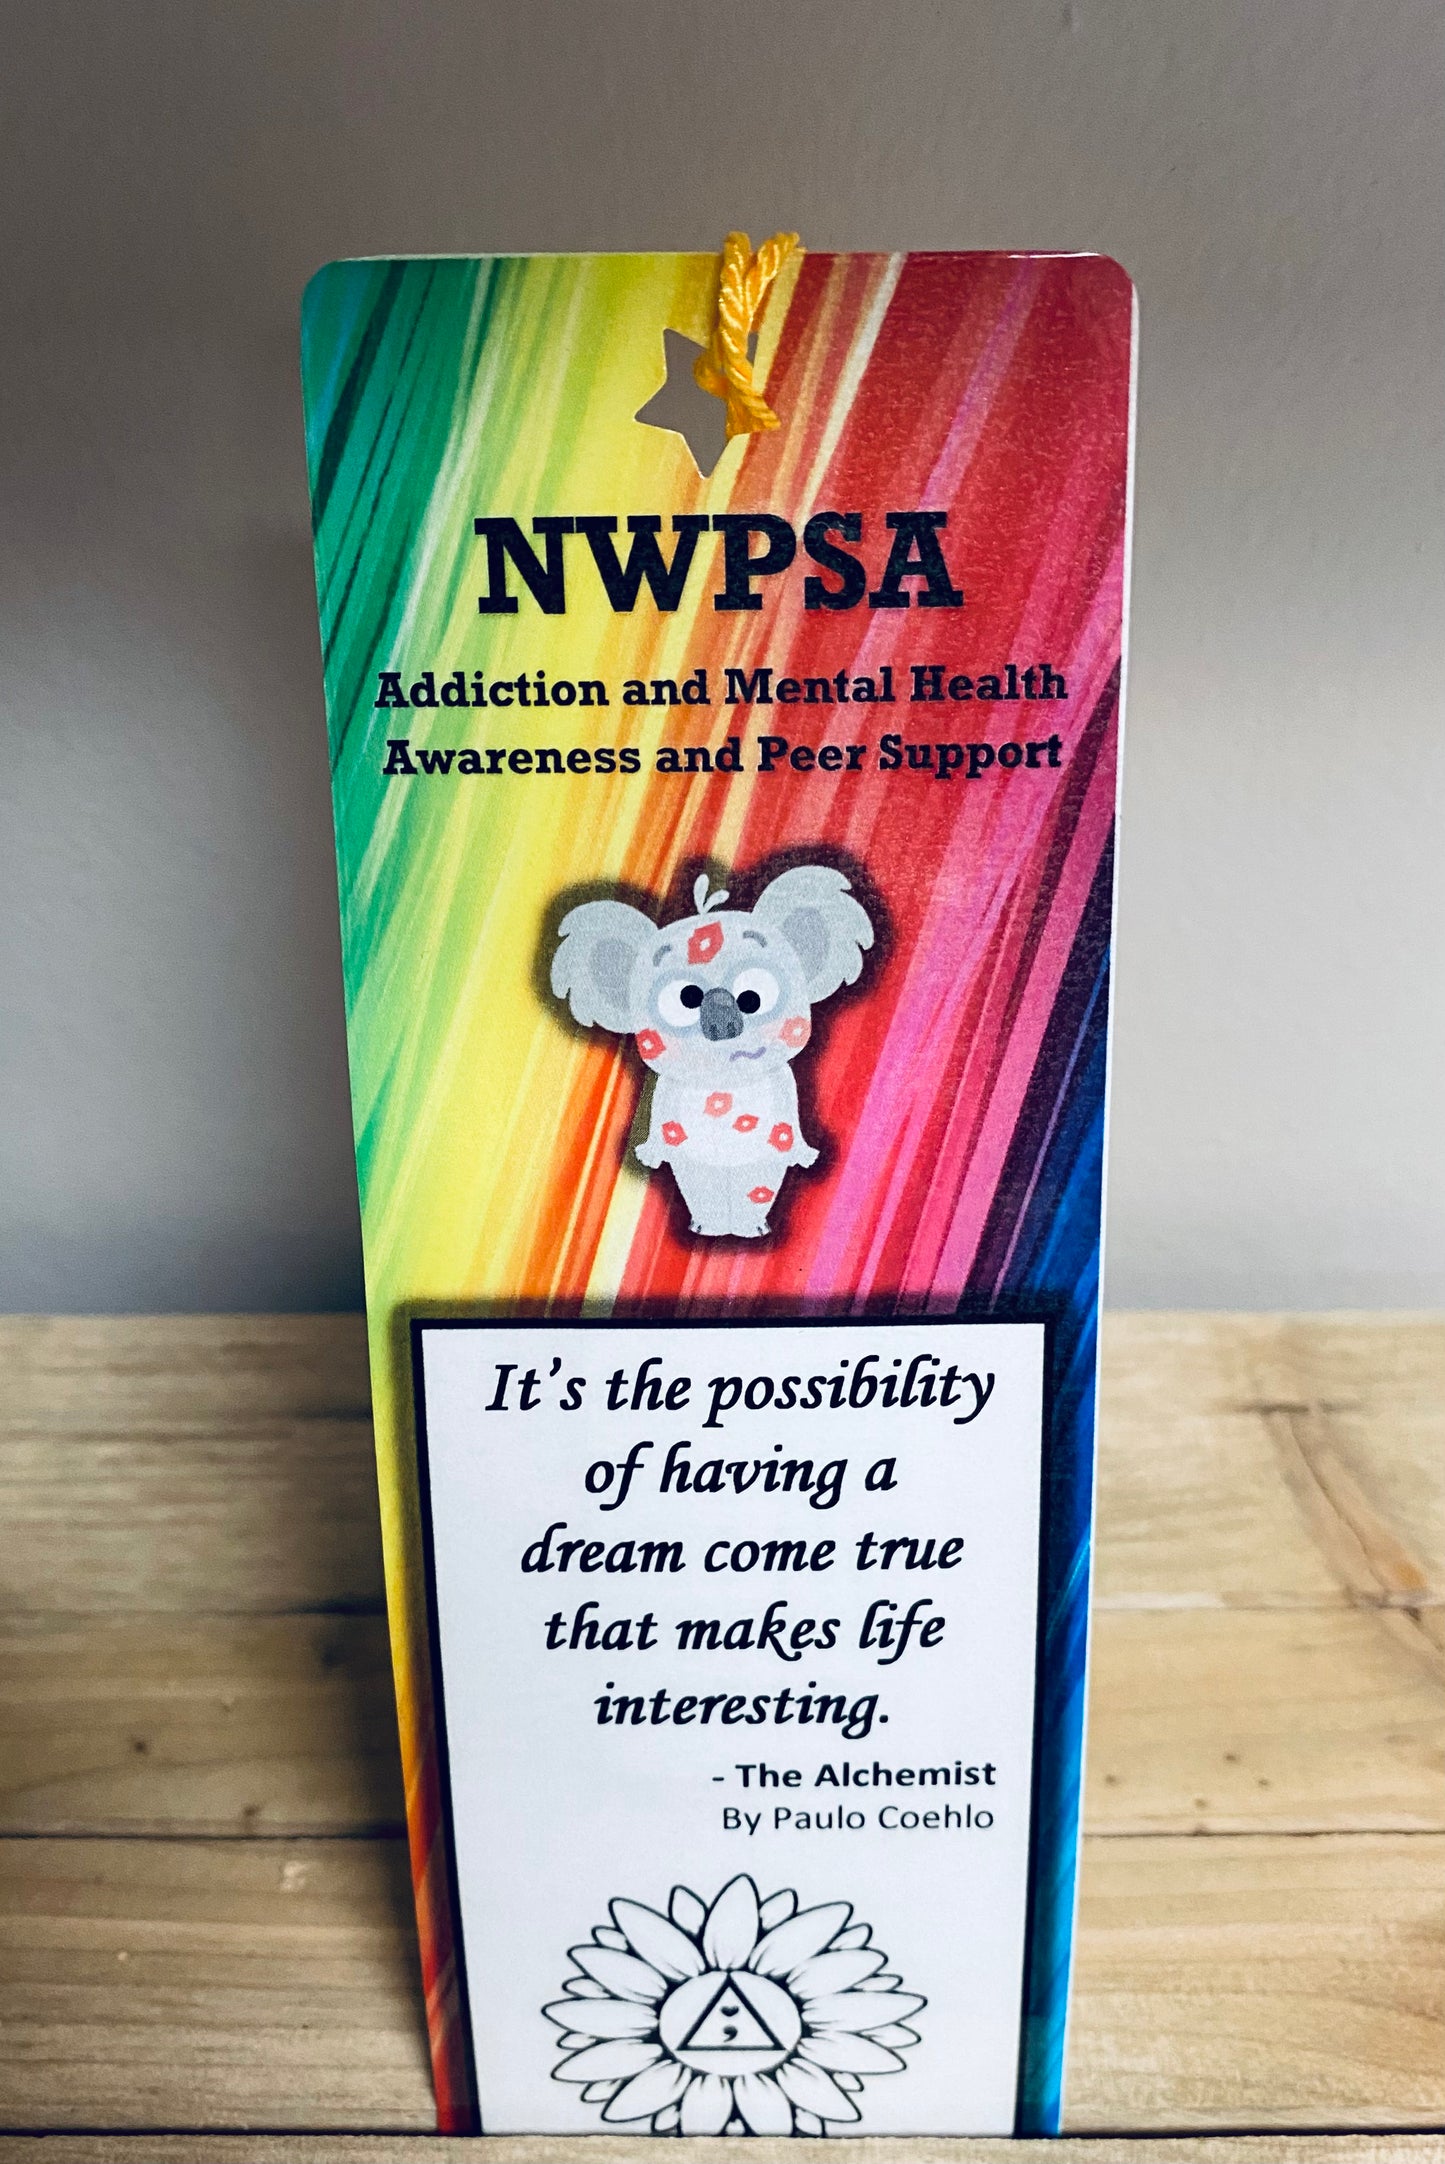 NWPSA-Addiction and Mental Health Awareness and Peer Support Fundraiser